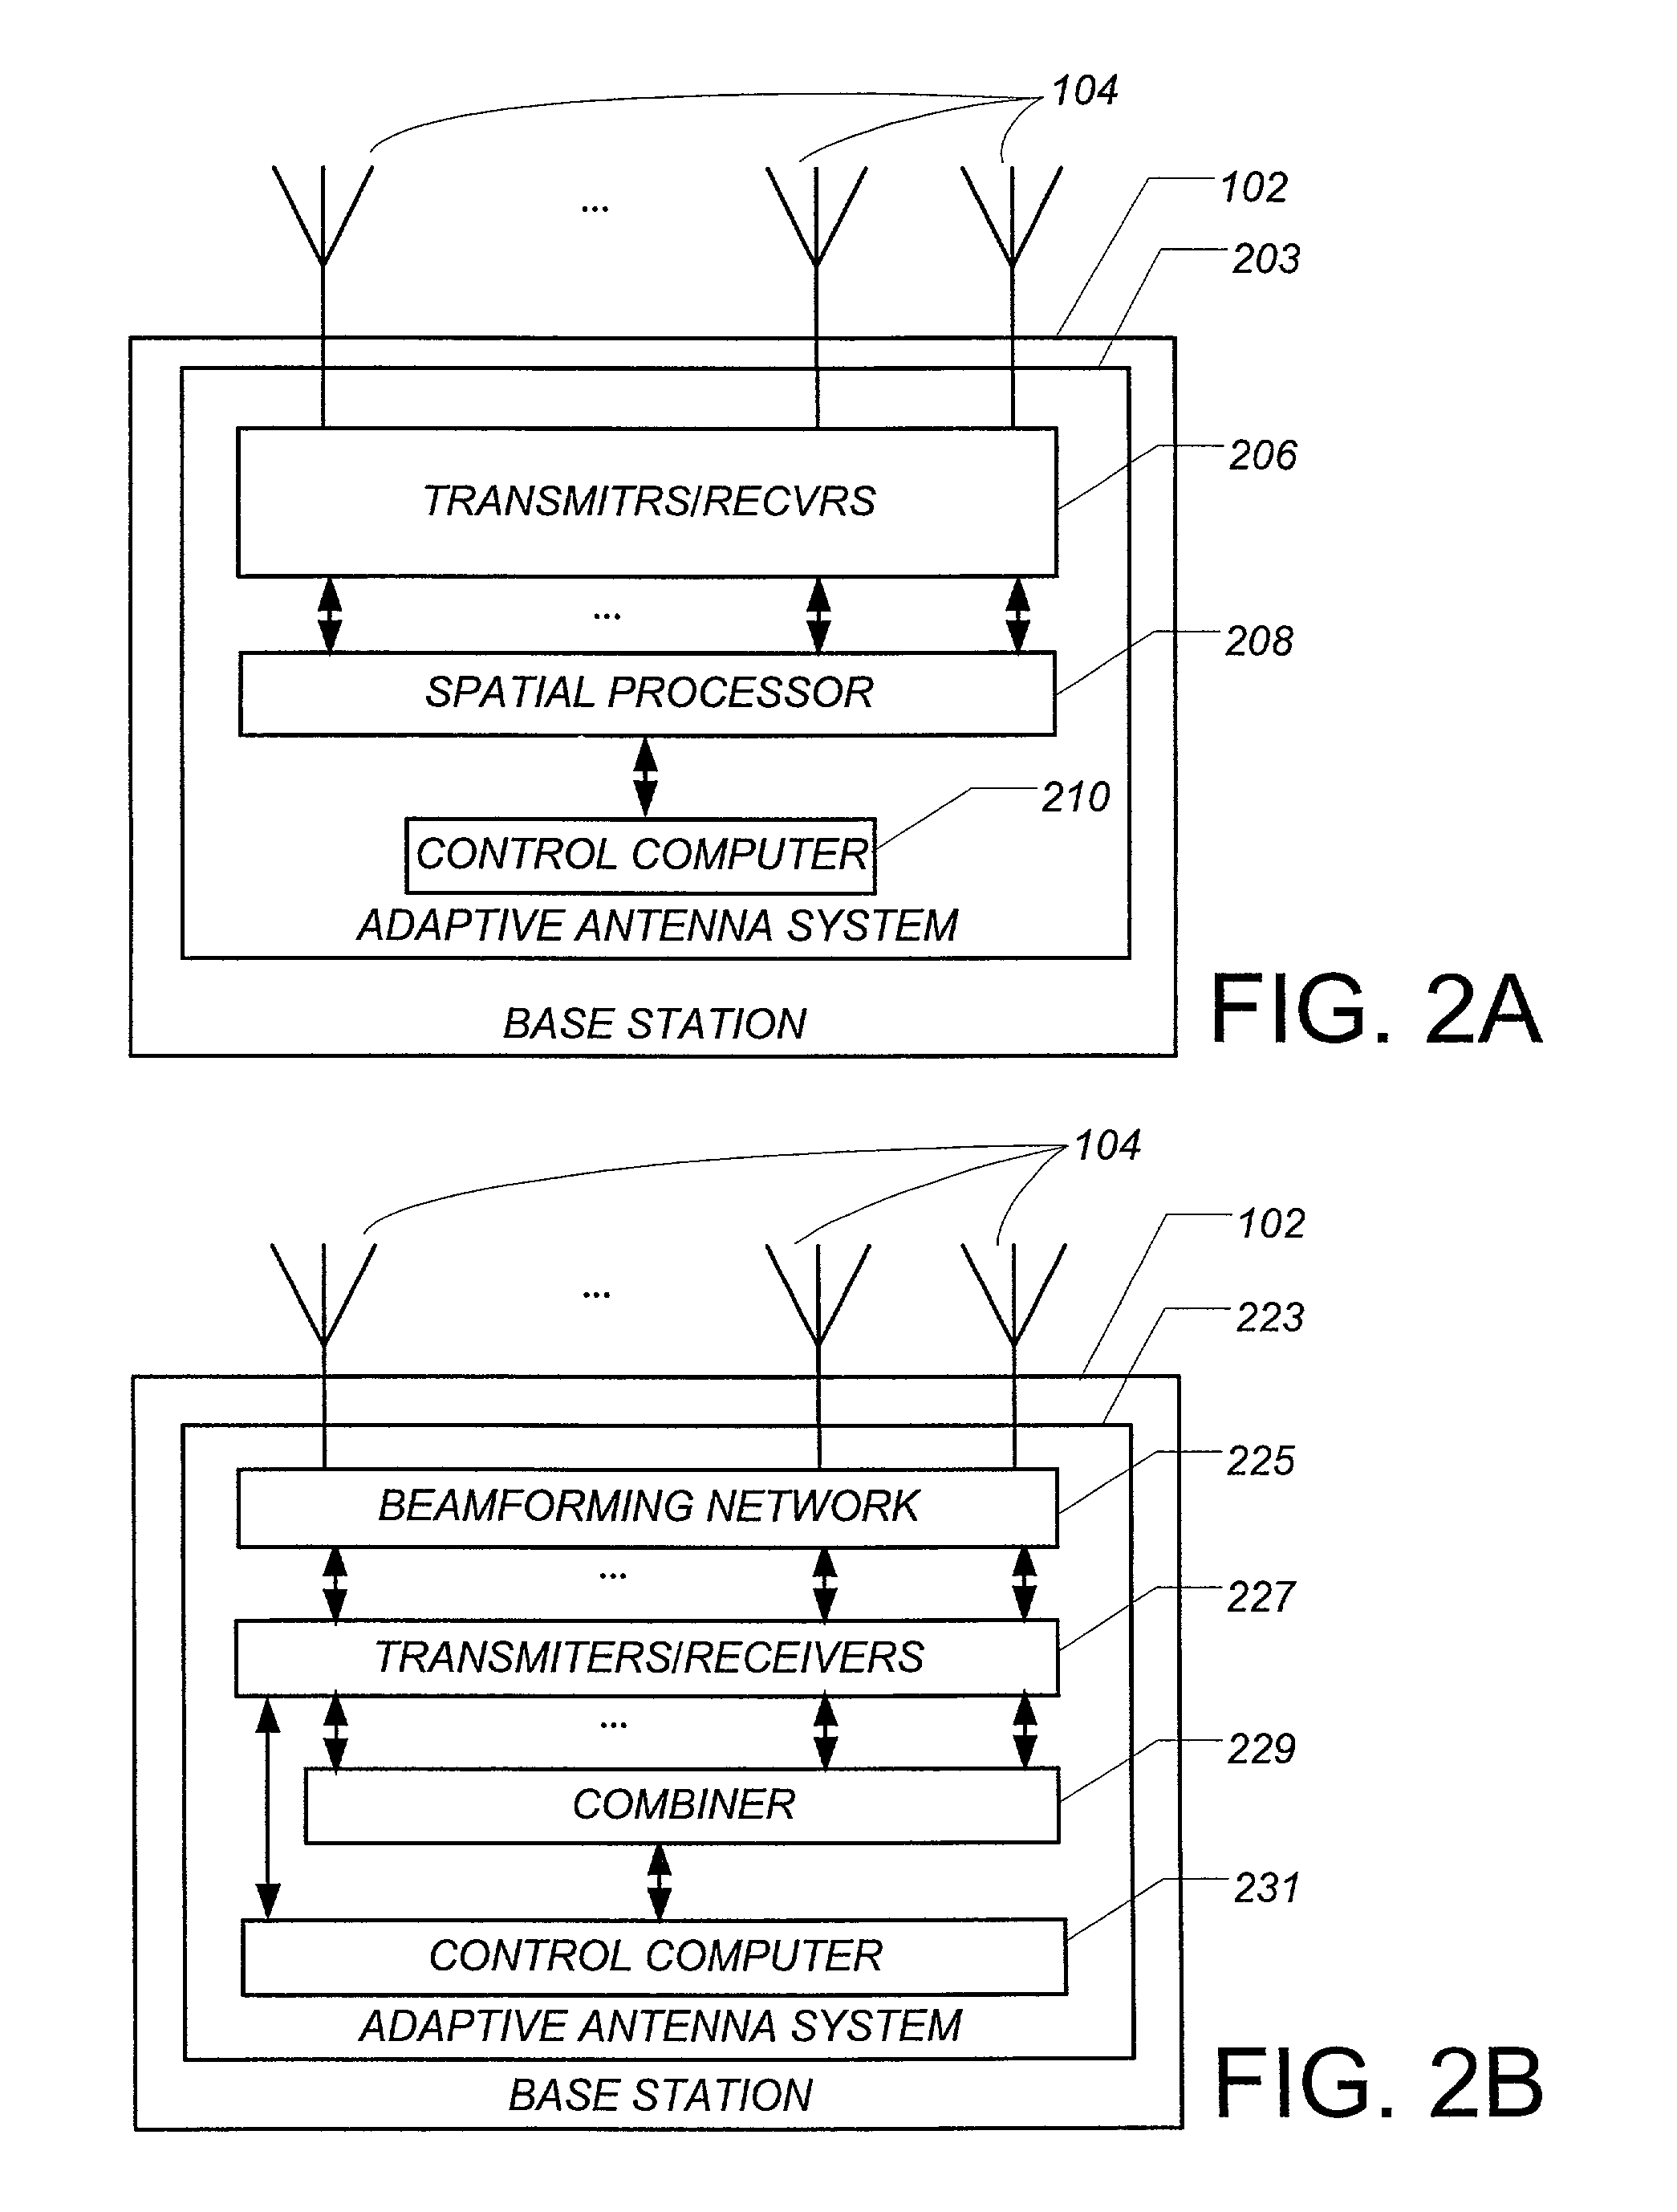 Non-directional transmitting from a wireless data base station having a smart antenna system